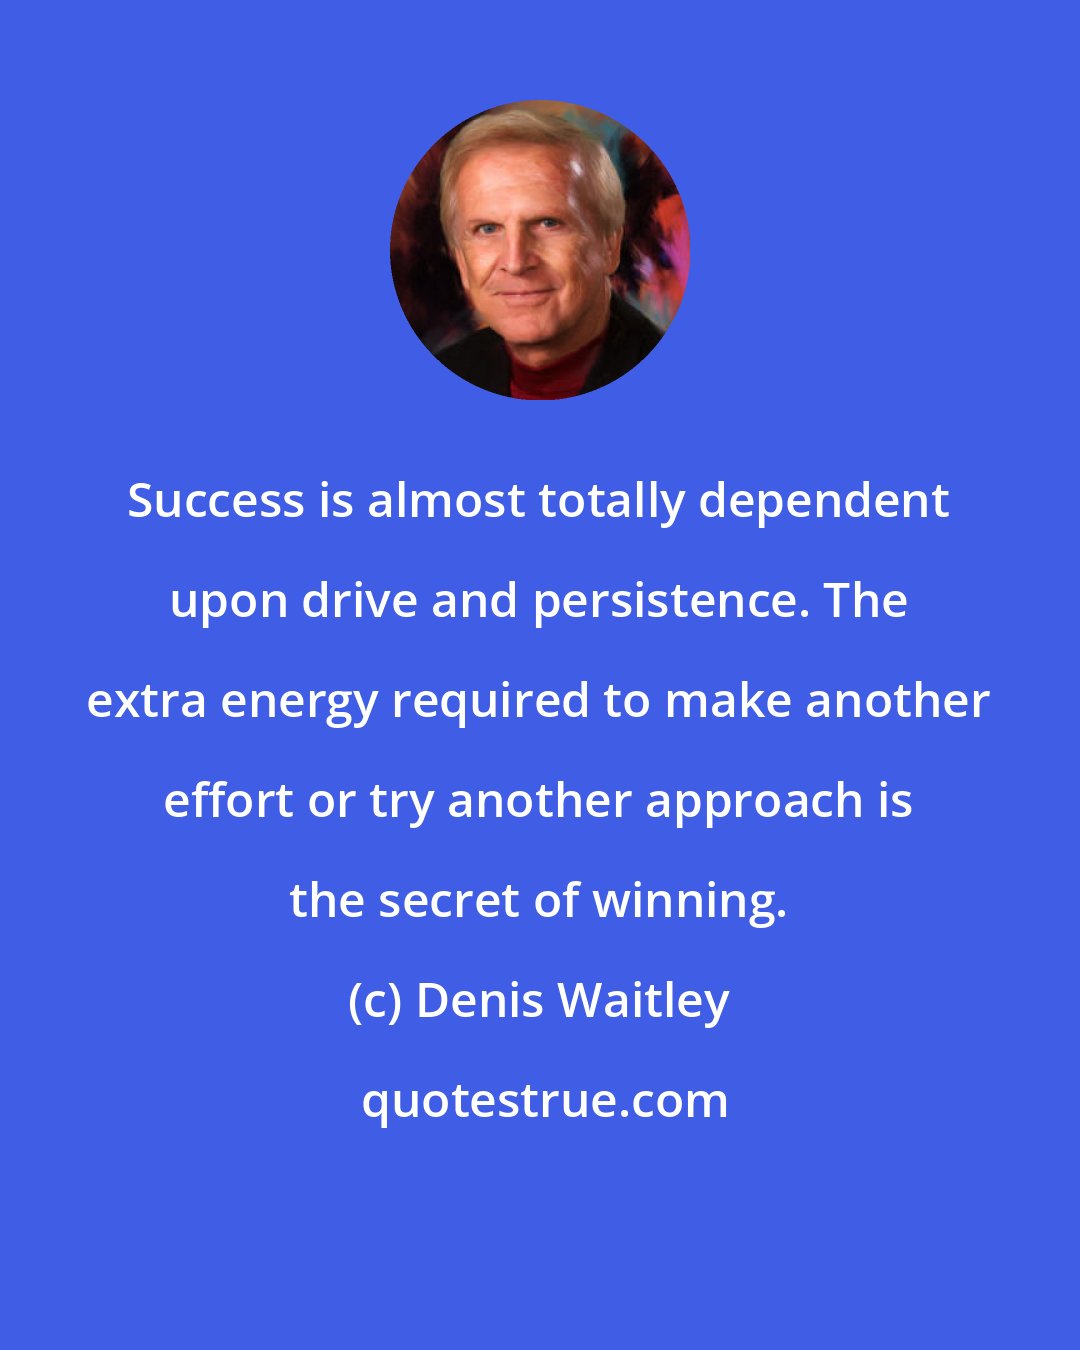 Denis Waitley: Success is almost totally dependent upon drive and persistence. The extra energy required to make another effort or try another approach is the secret of winning.